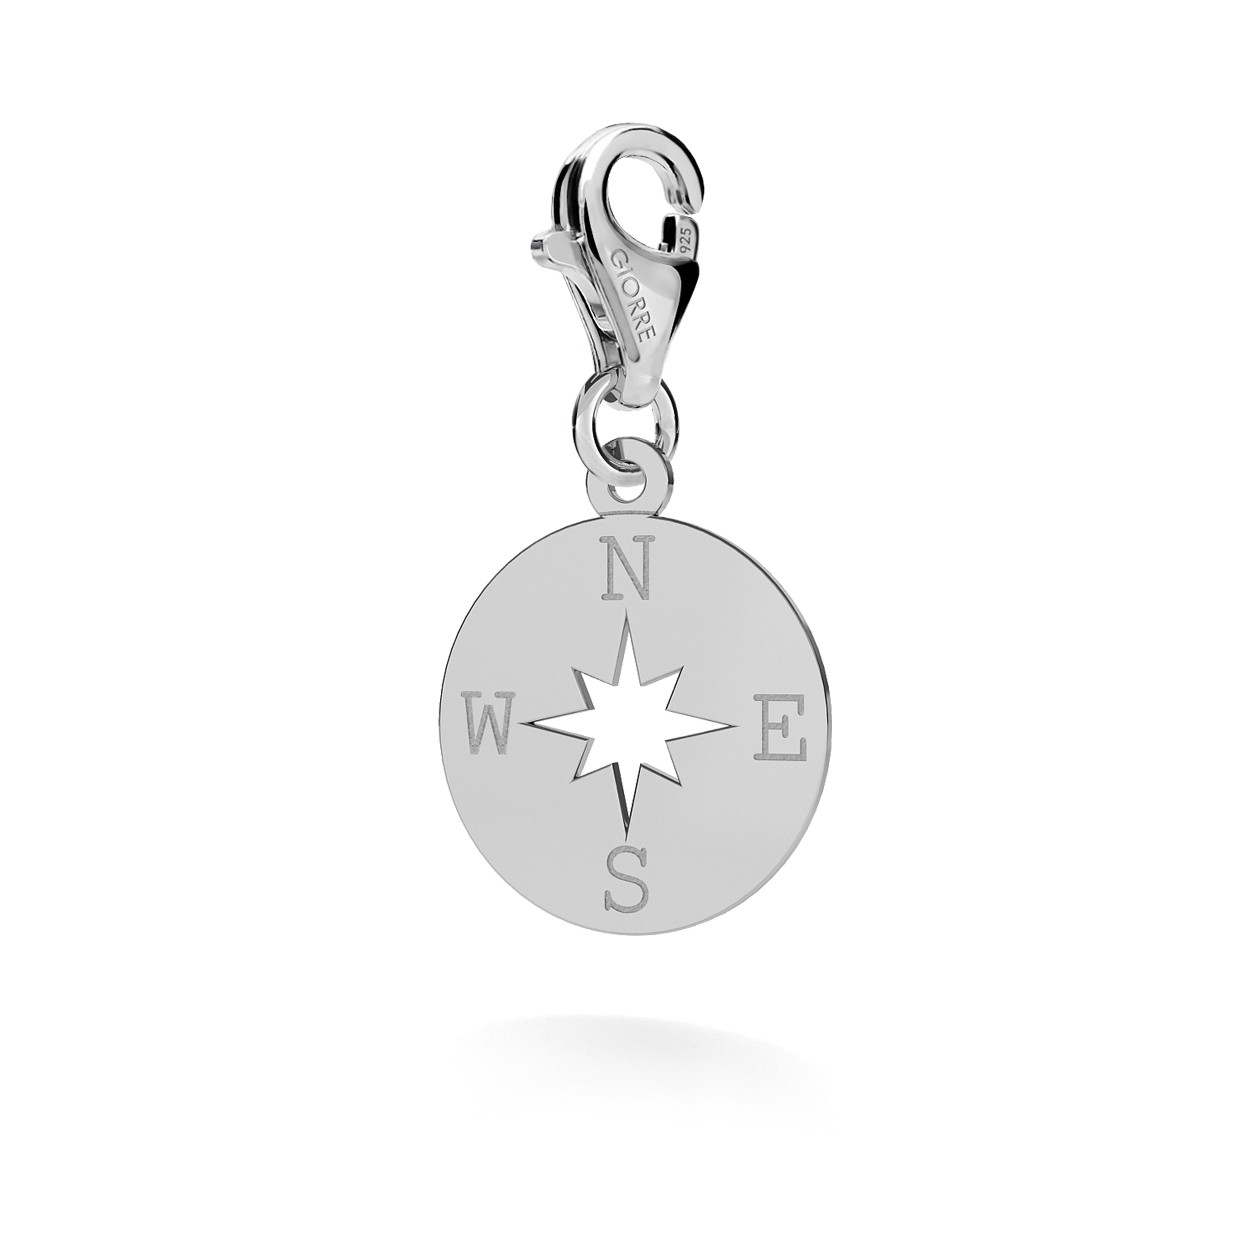 CHARM 63, WIND ROSE, SILVER 925, RHODIUM OR GOLD PLATED